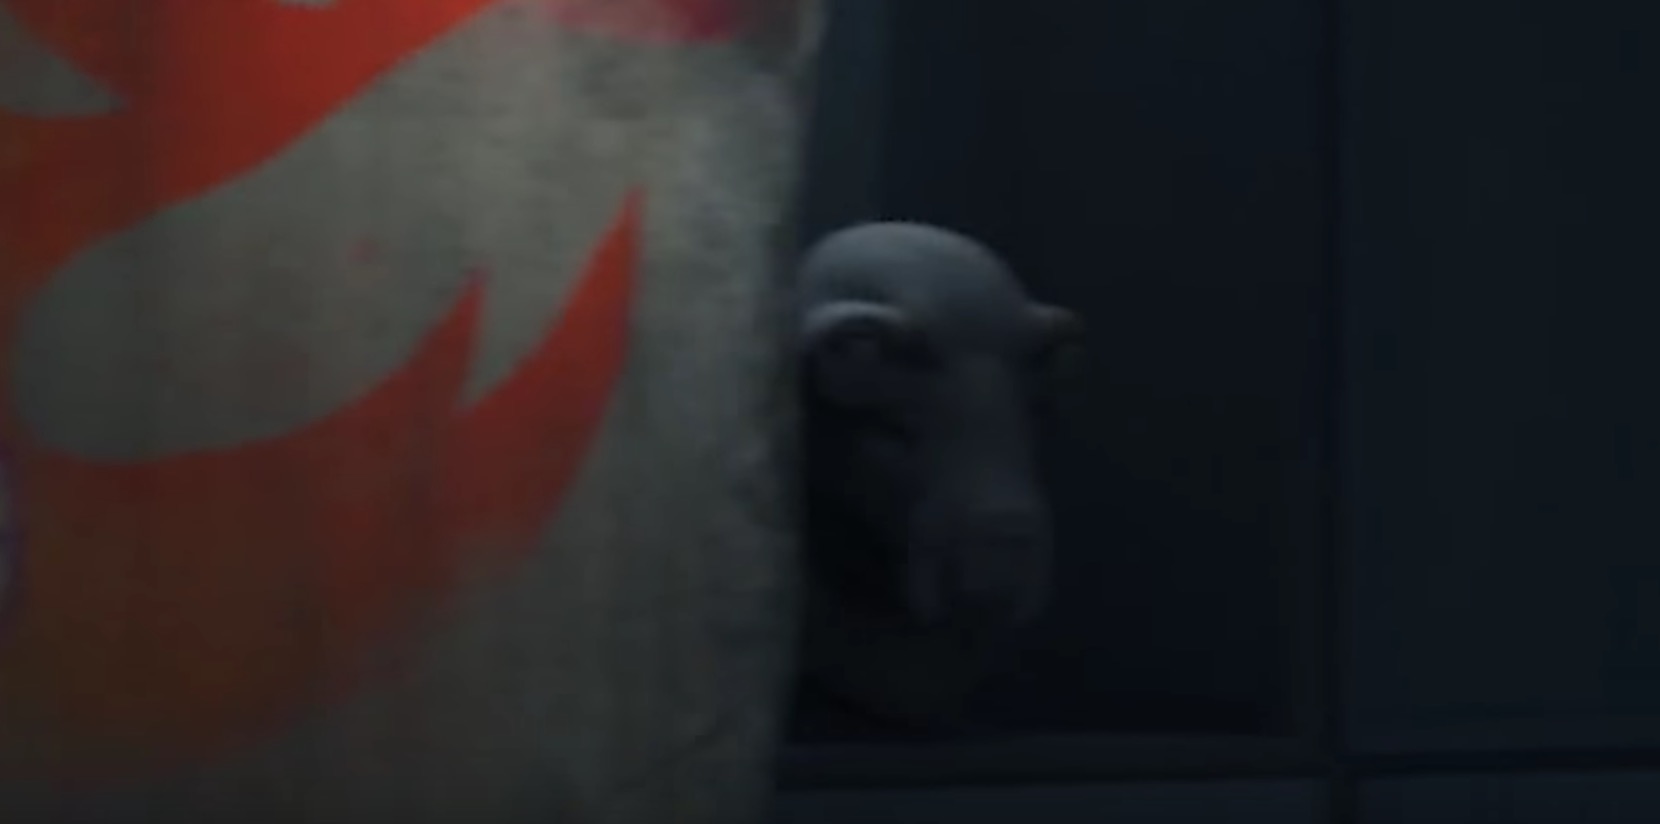 Thrawn’s Office On Star Wars Rebels Was Full Of Easter Eggs